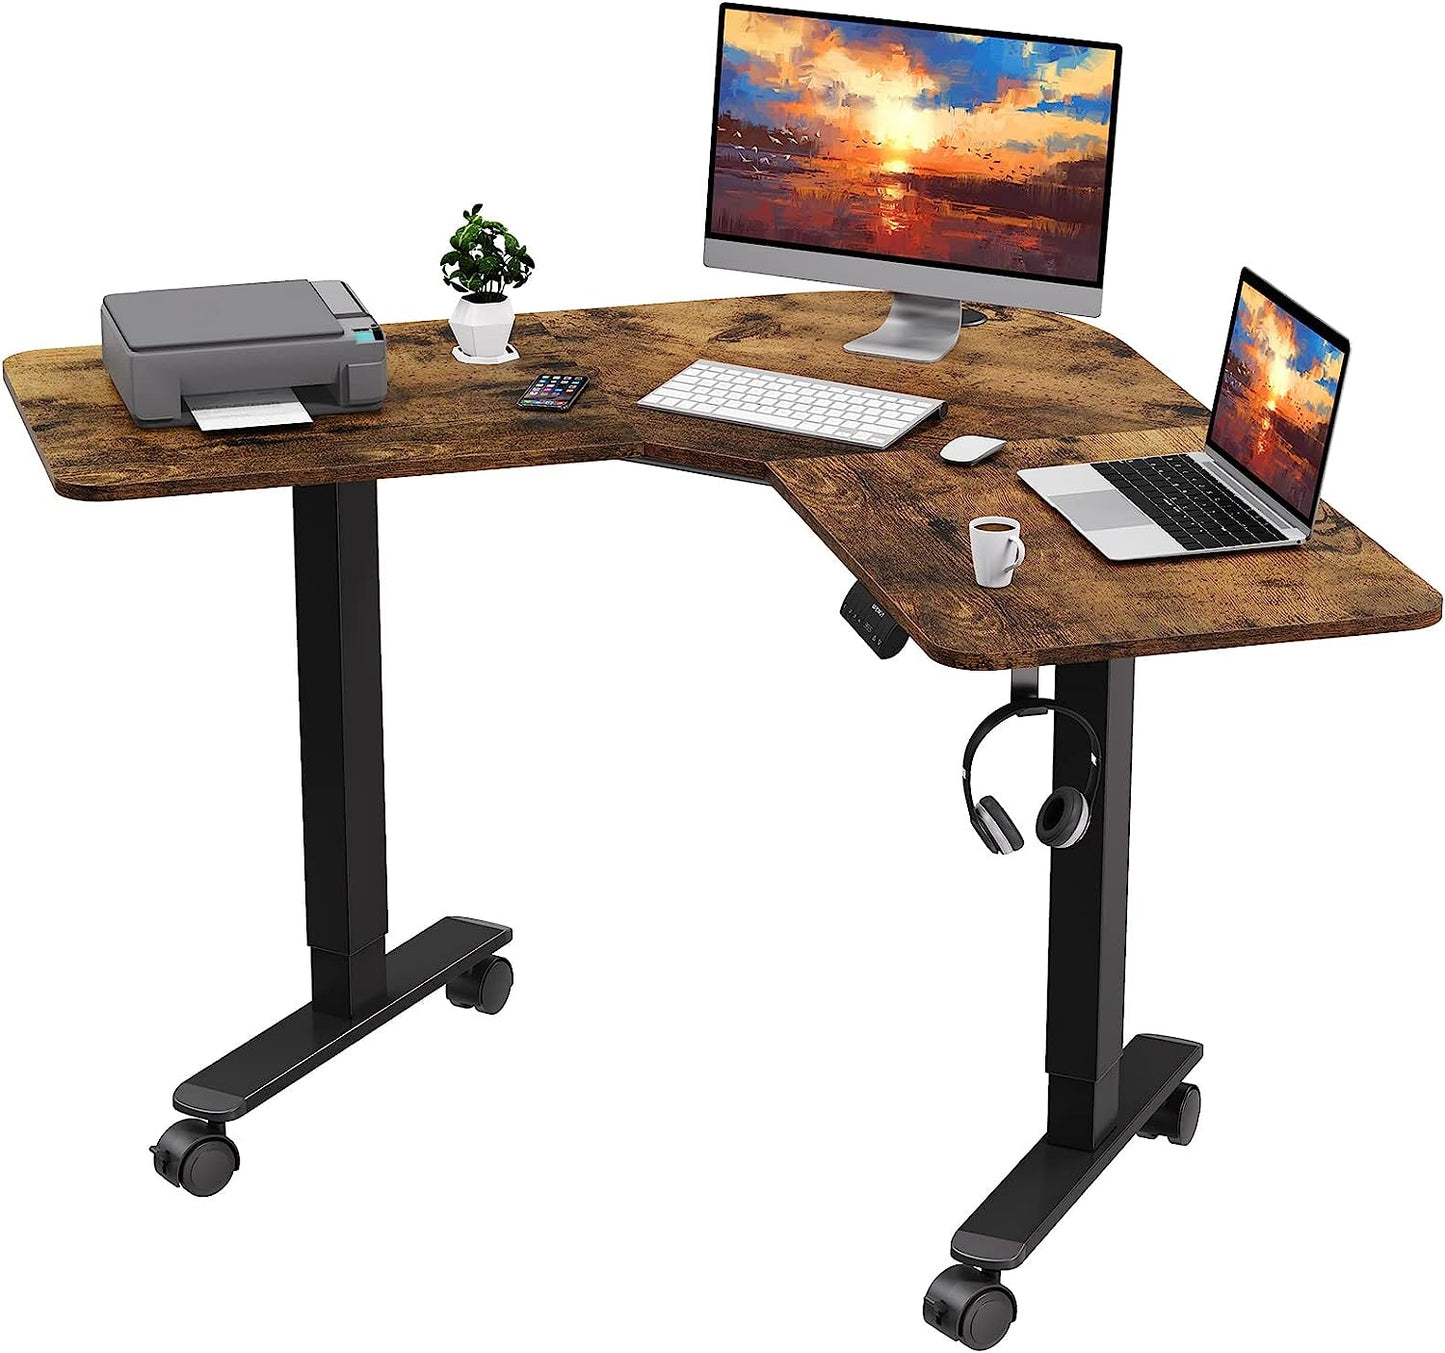 WOKA L Shaped Standing Desk, 48” x 48“ Height Adjustable Electric Stand Up Desk, Sit Stand Desk with Memory Controller for Home Office, Motorized Corner Standing Desk with Splice Board, Rustic Brown